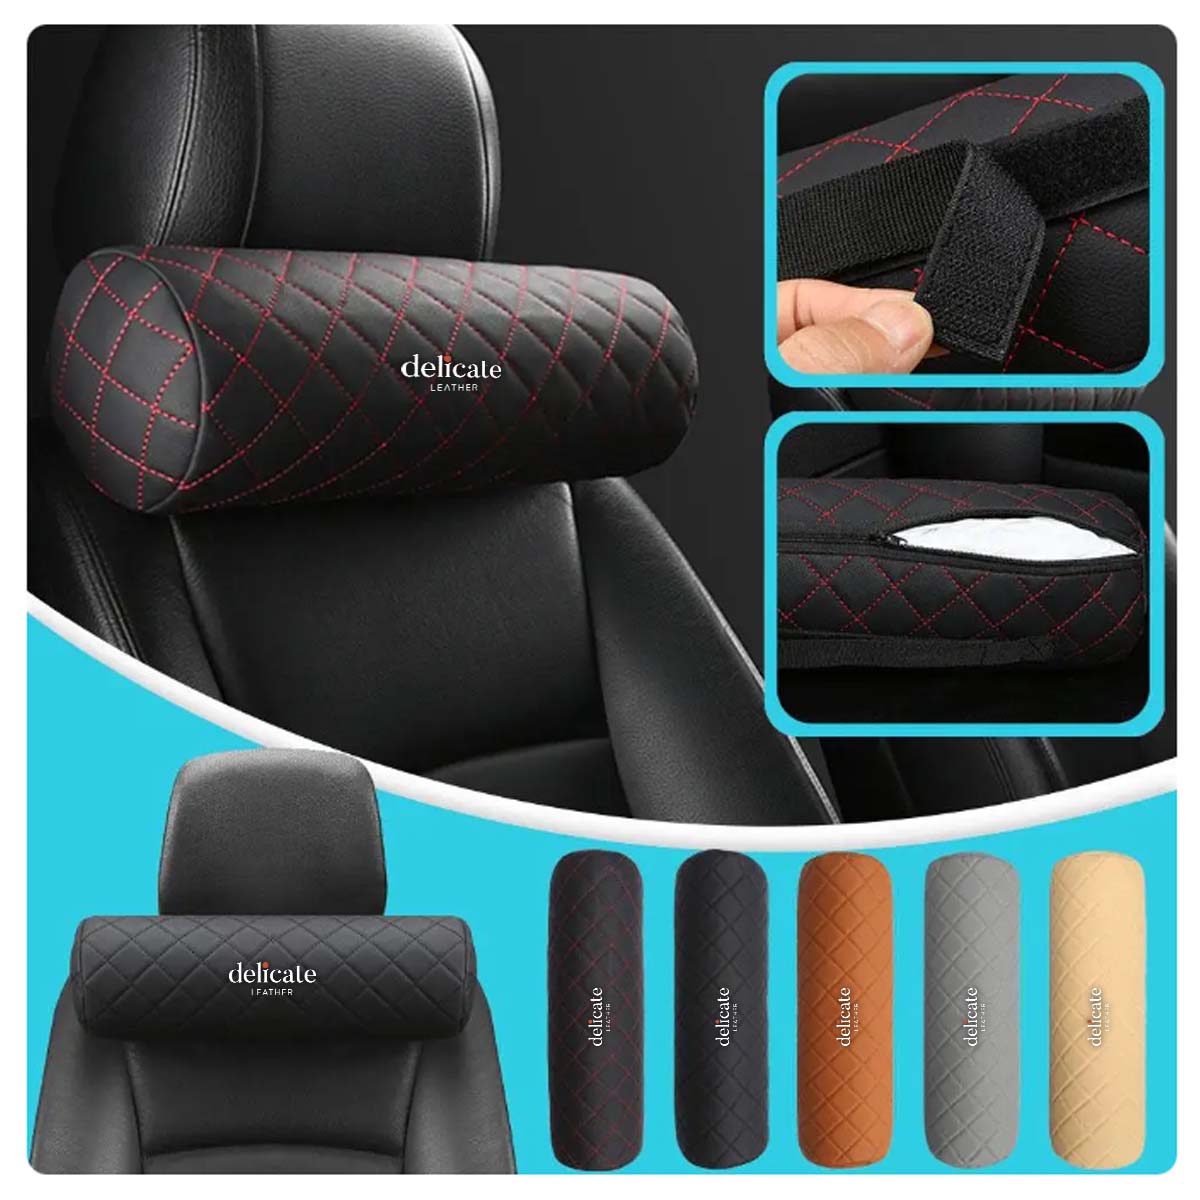 Premium Leather Memory Foam Car Seat Neck Pillow: A Luxurious Cervical Pillow for Enhanced Comfort and Support in Both Car Seats and Office Chairs - Delicate Leather